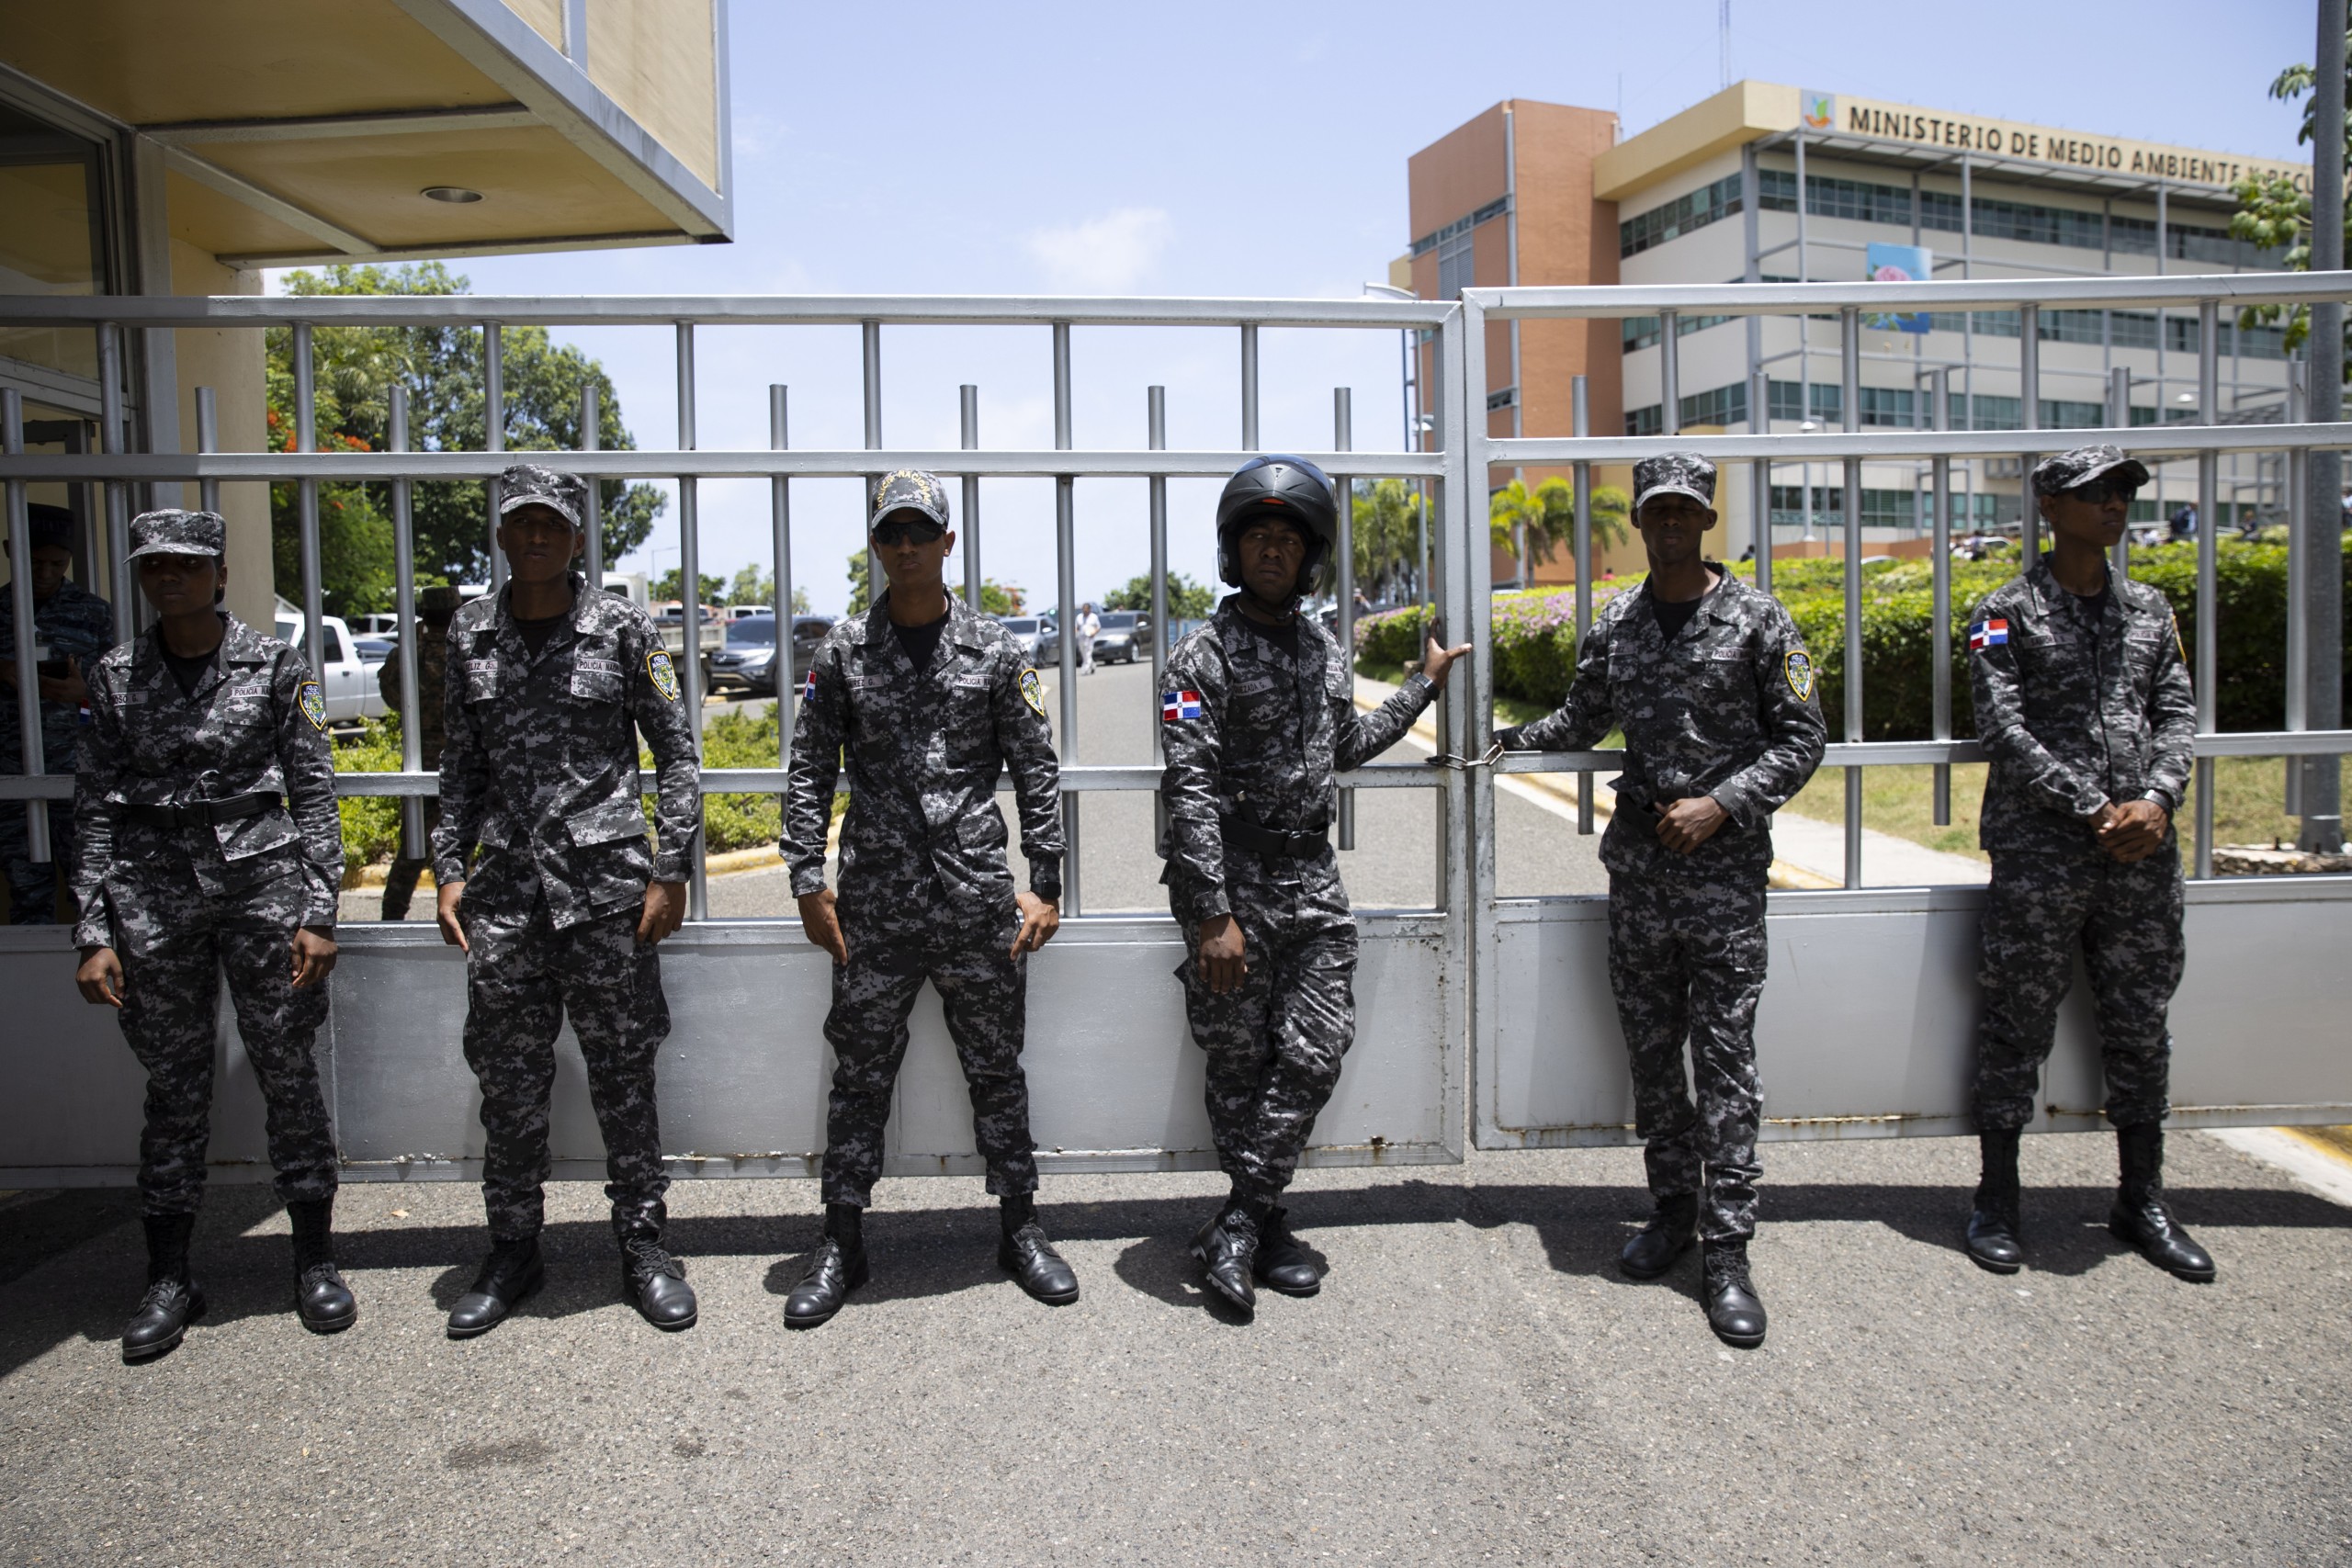 epa09999426 Members of the Security Forces stand guard in front of the Ministry of the Environment of the Dominican Republic, in Santo Domingo, Dominican Republic, 06 June 2022. The Minister of the Environment of the Dominican Republic, Orlando Jorge Mera, was shot and killed in his office, according to political sources. The Ministry of the Environment has not offered official information about what happened, and in an official note, said 'We are troubled by the situation'.  EPA/Orlando Barria